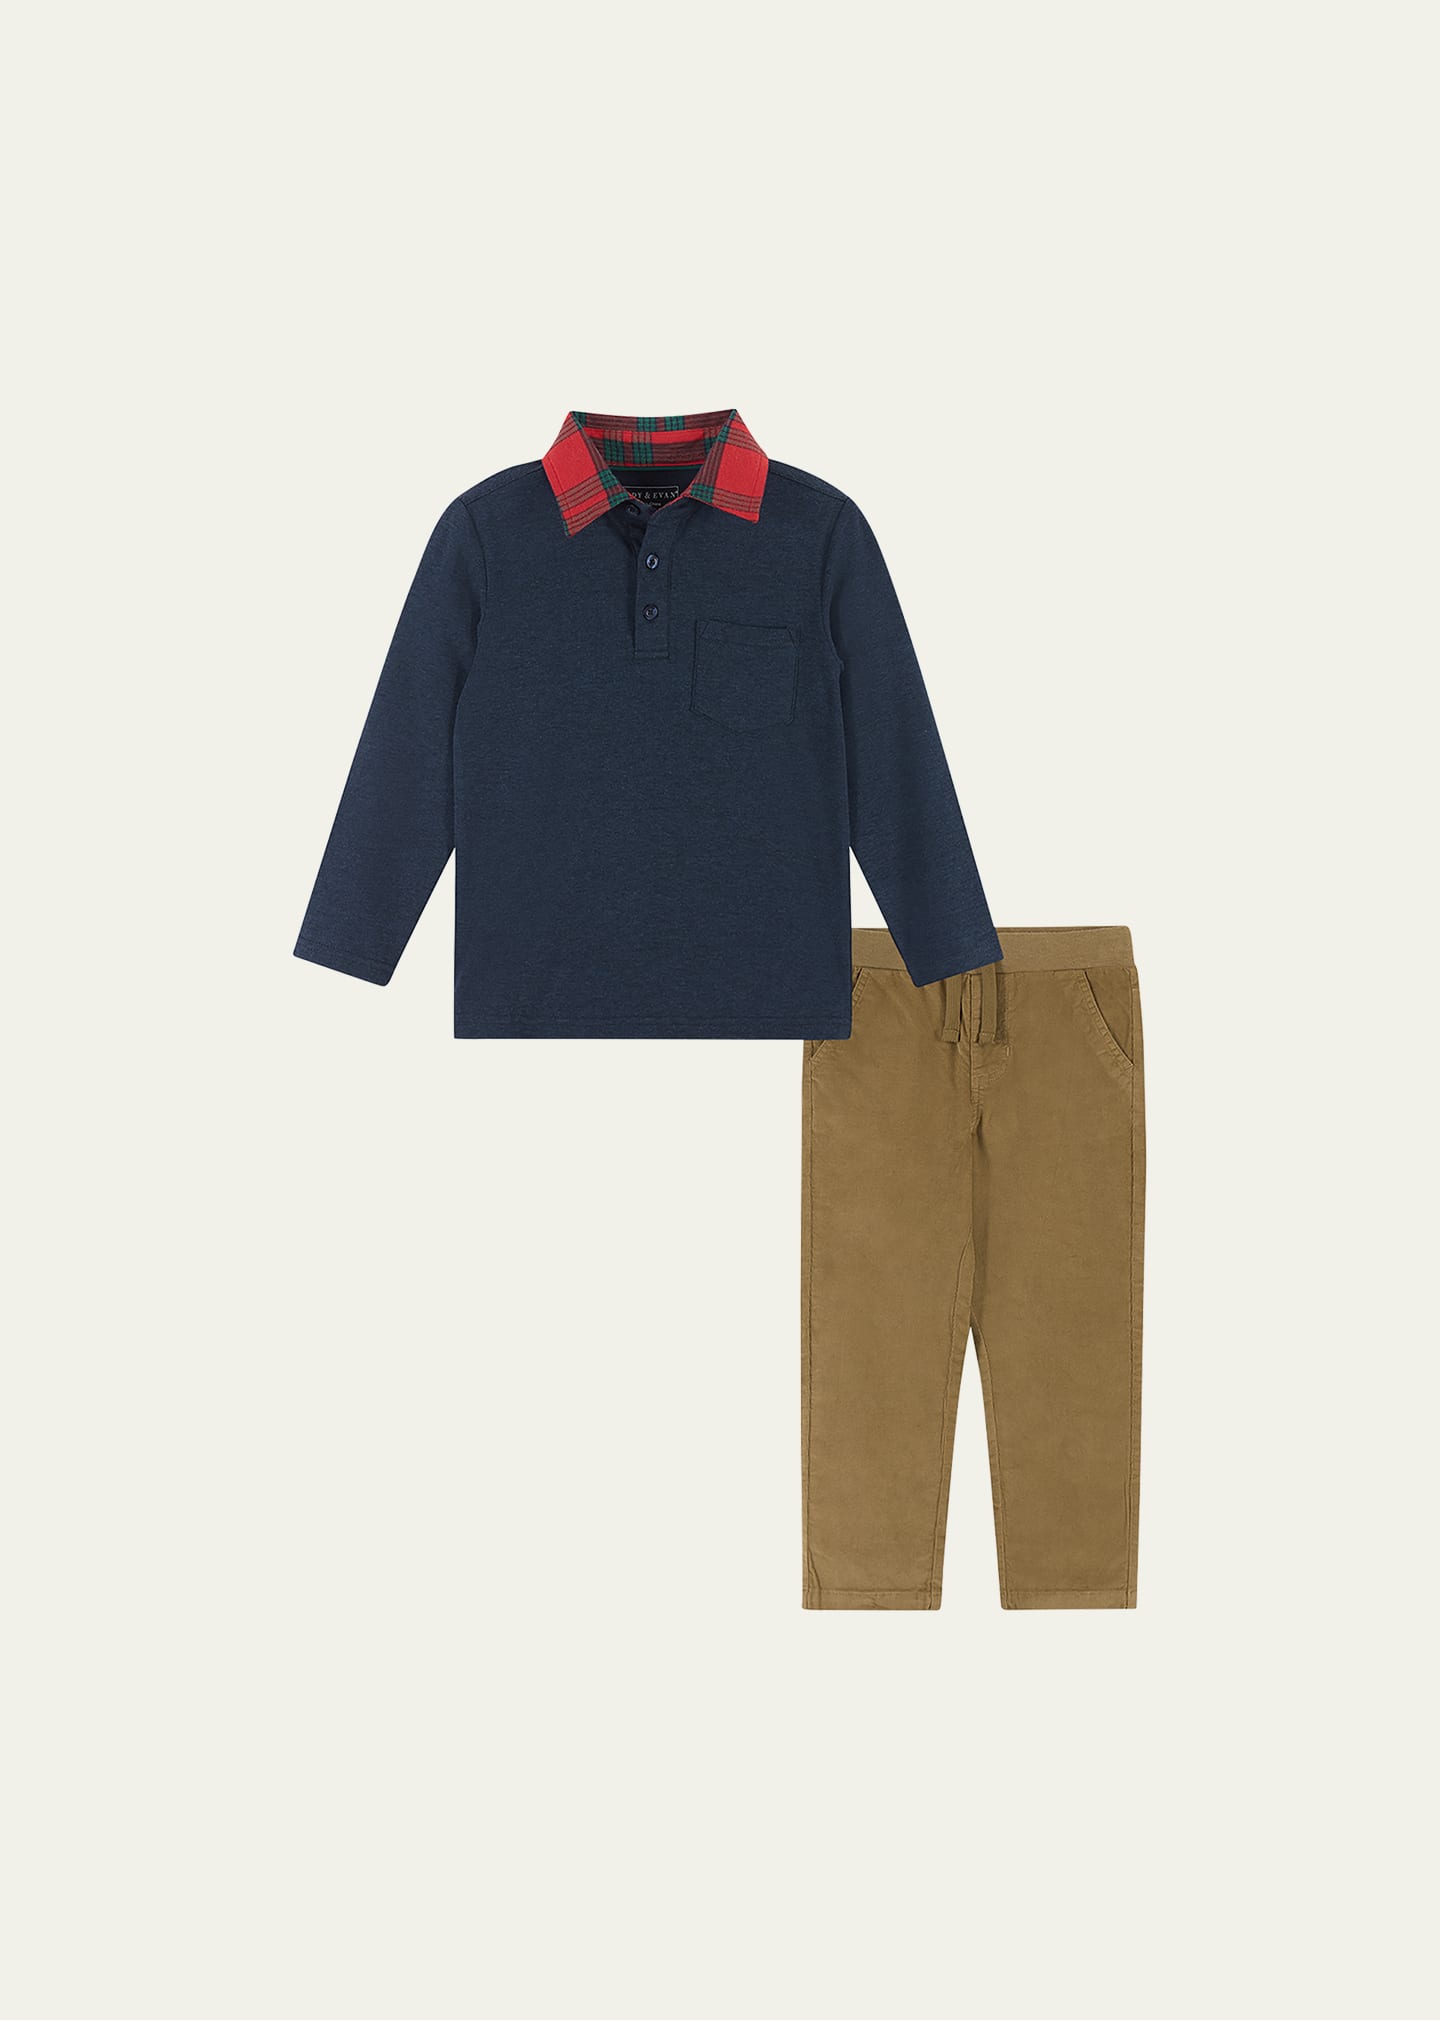 Shop Andy & Evan Boy's Holiday Polo Bodysuit W/ Pants Set In Navy And Plaid